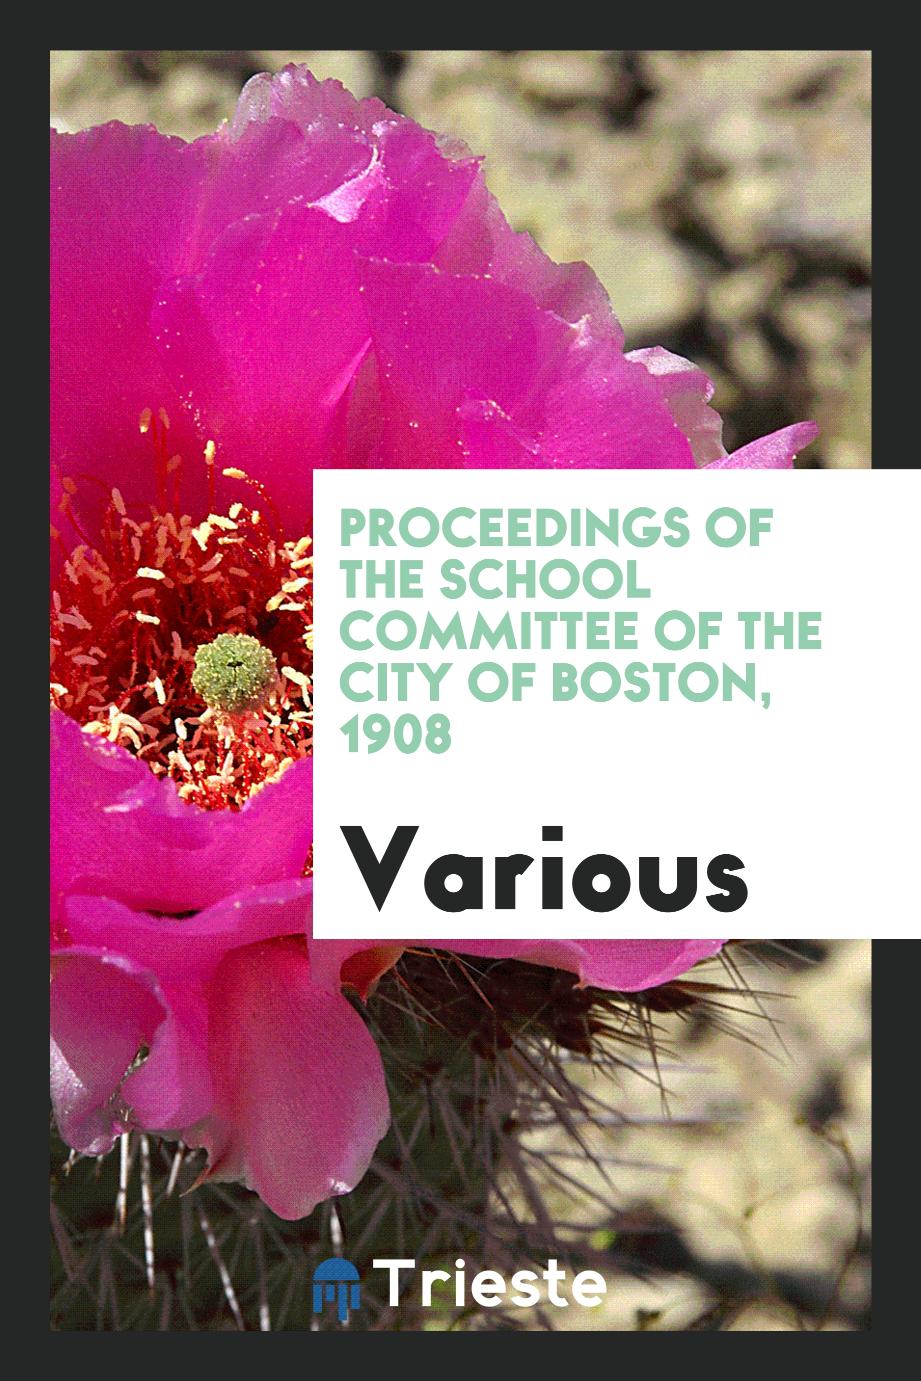 Proceedings of the School Committee of the City of Boston, 1908